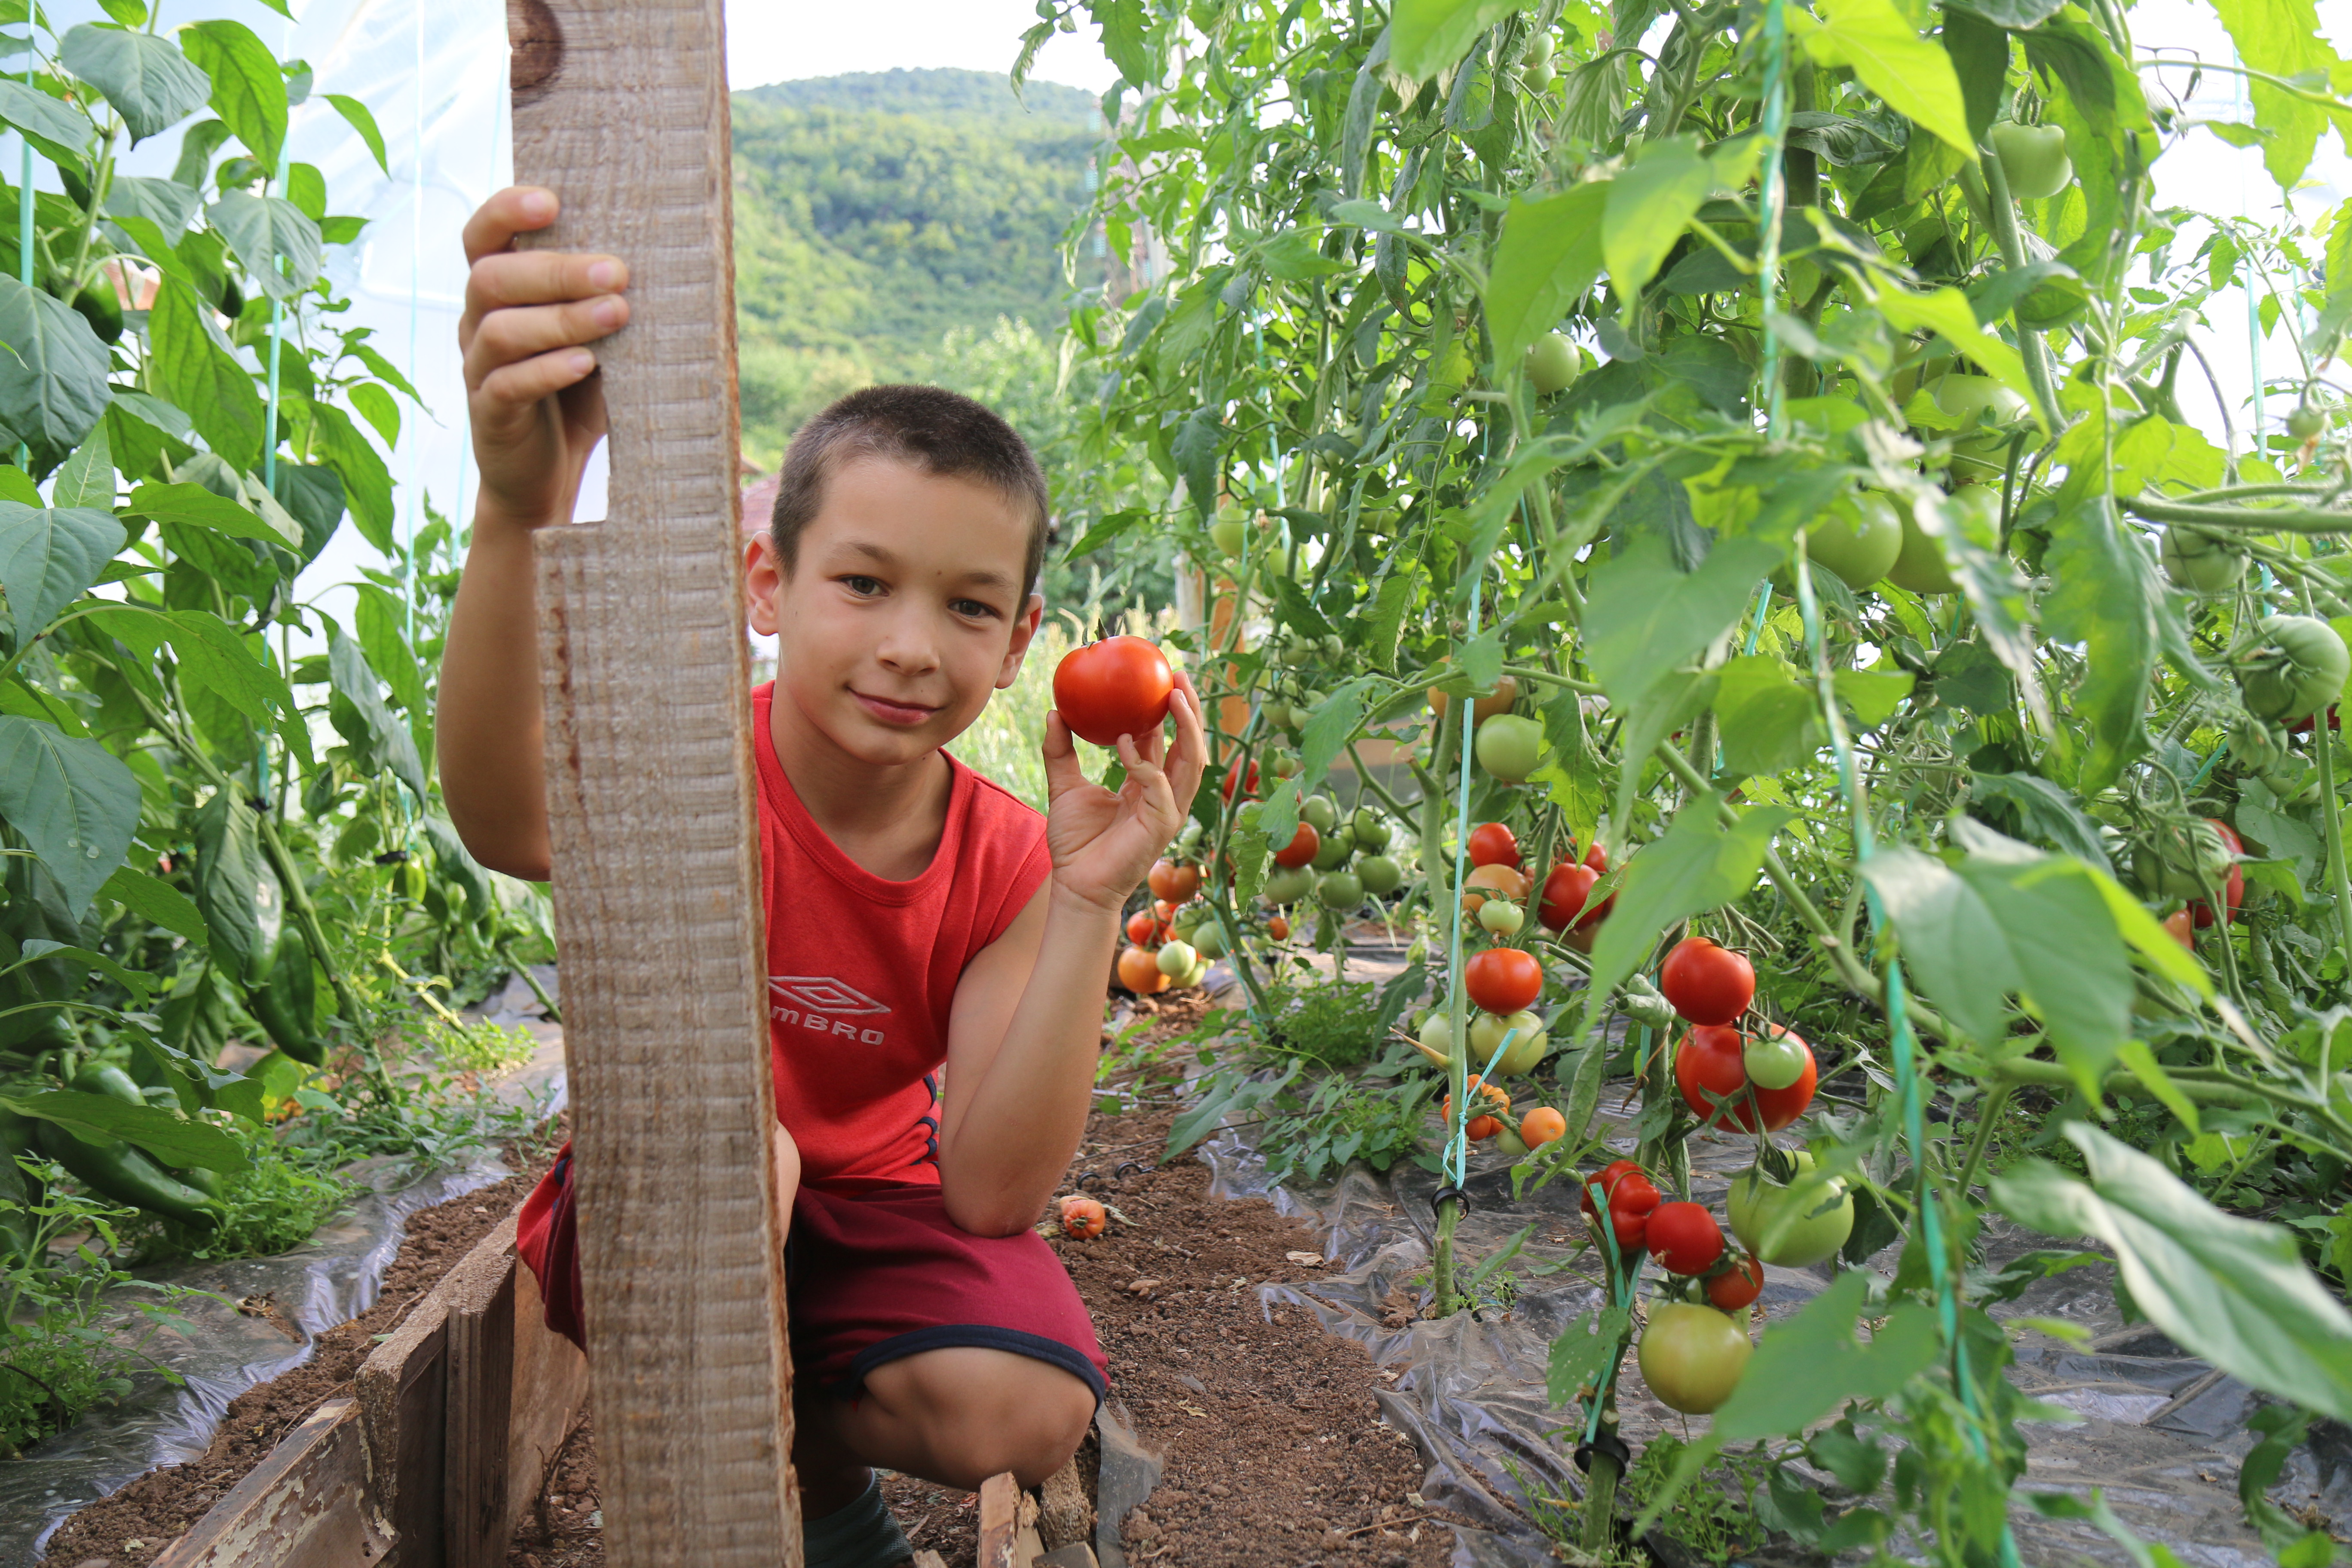 When you find a picture perfect greenhouse, full of produce, and see smiling faces full of hope, it is clear that you are doing the right thing,